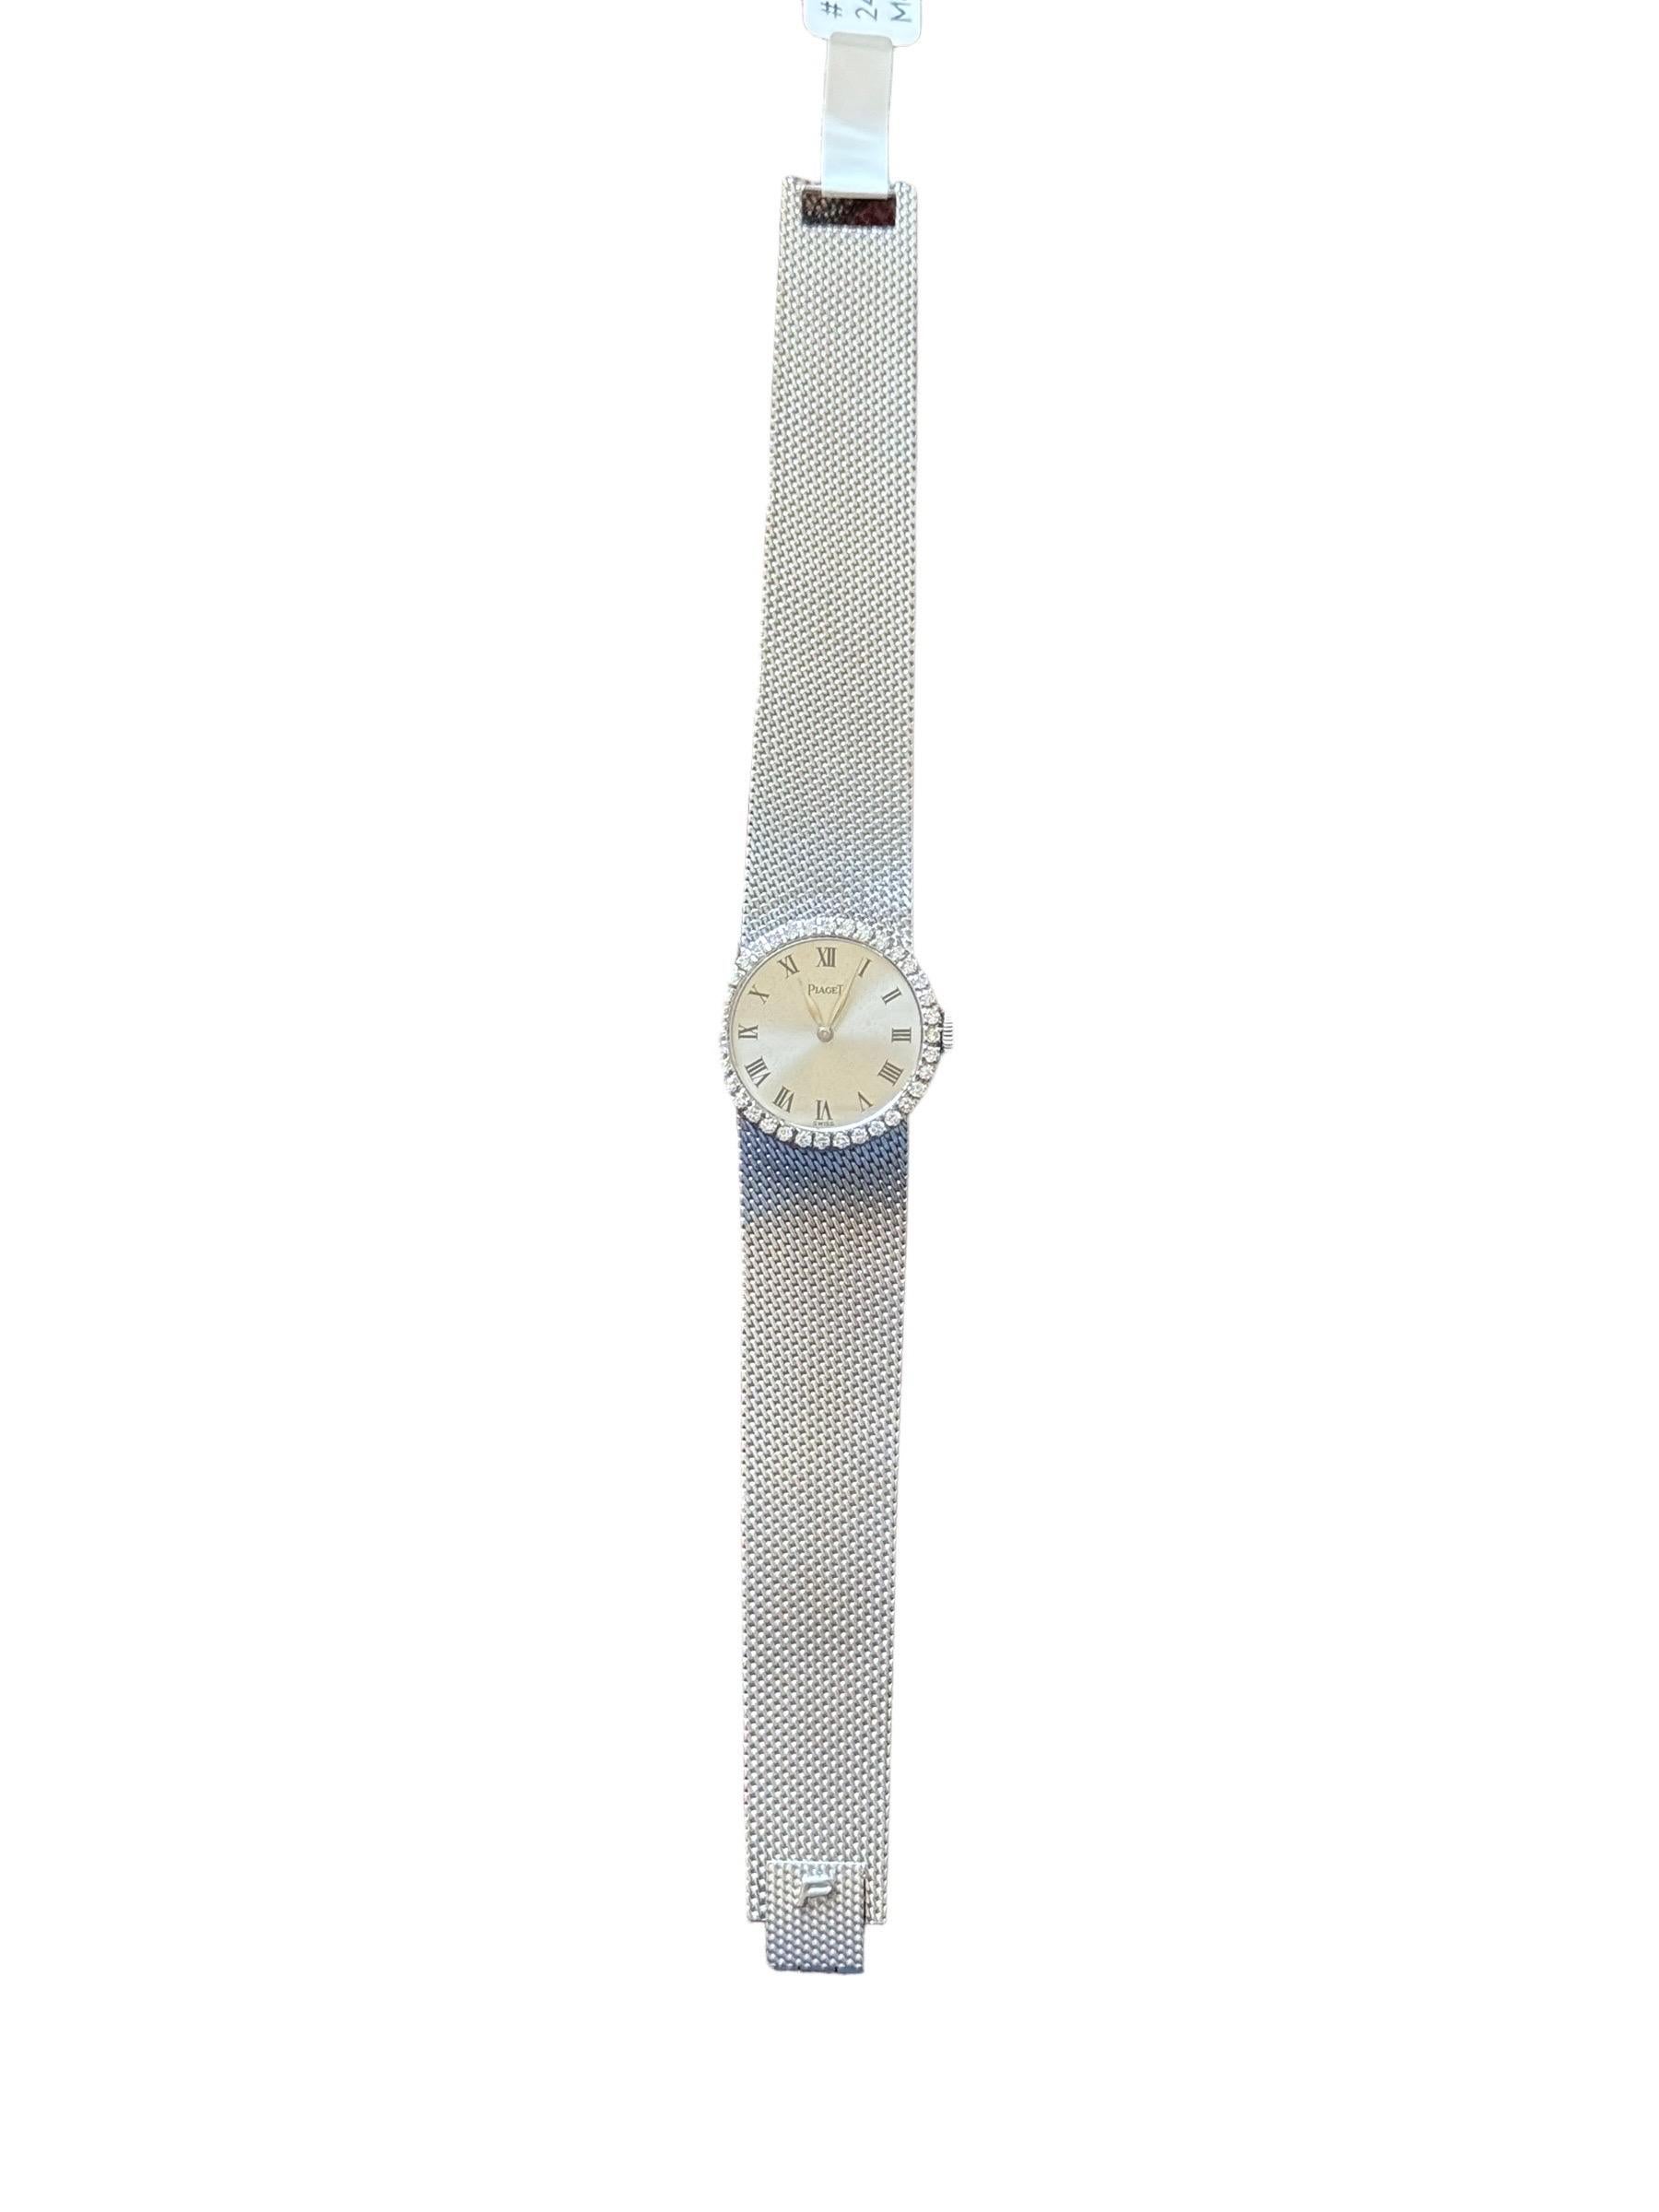 Women's Pristine Condition Piaget Silver Dial Ladies Watch 18K Solid White Gold